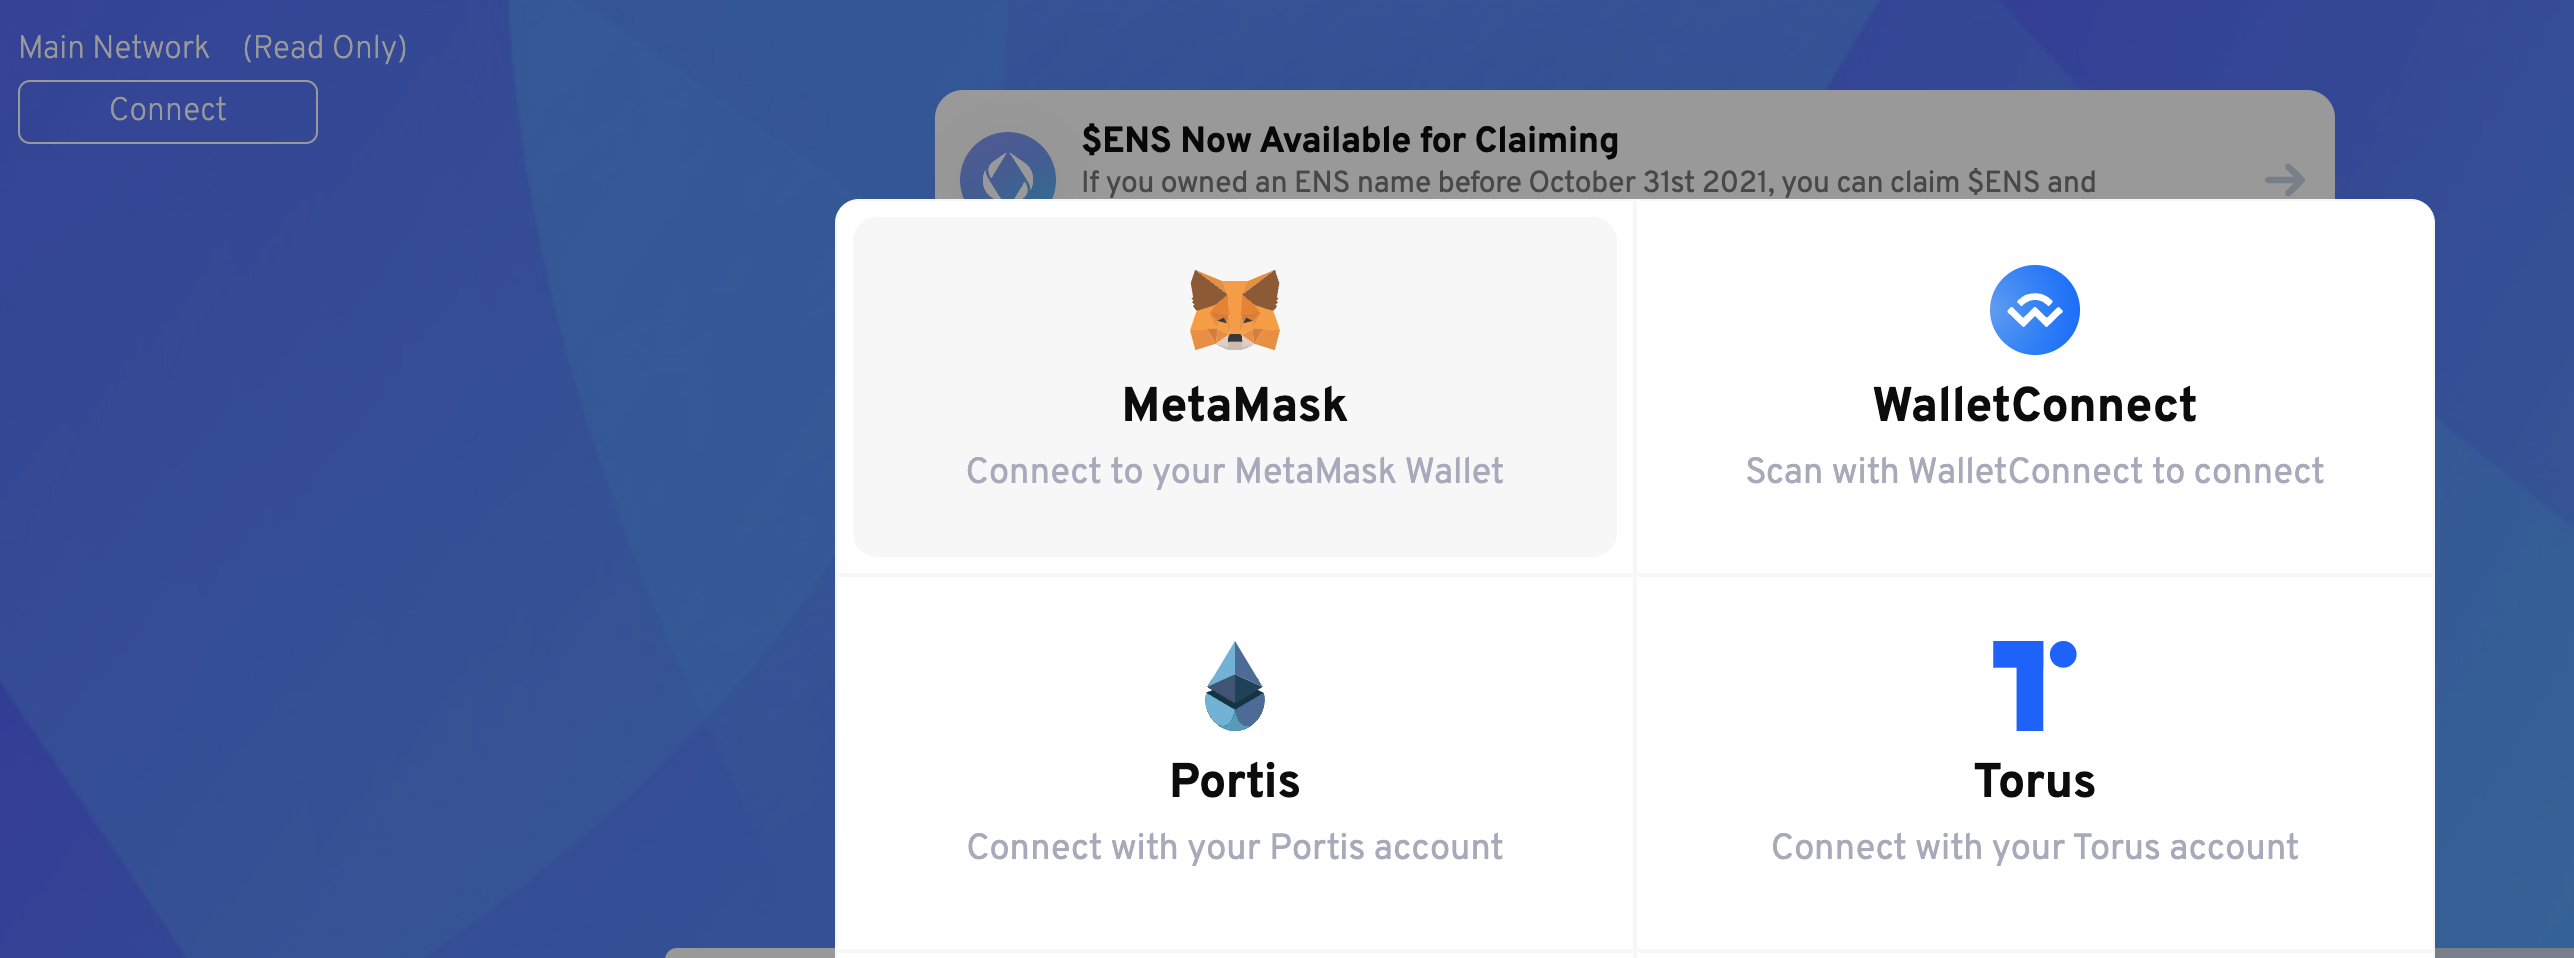 Connect to your MetaMask Wallet